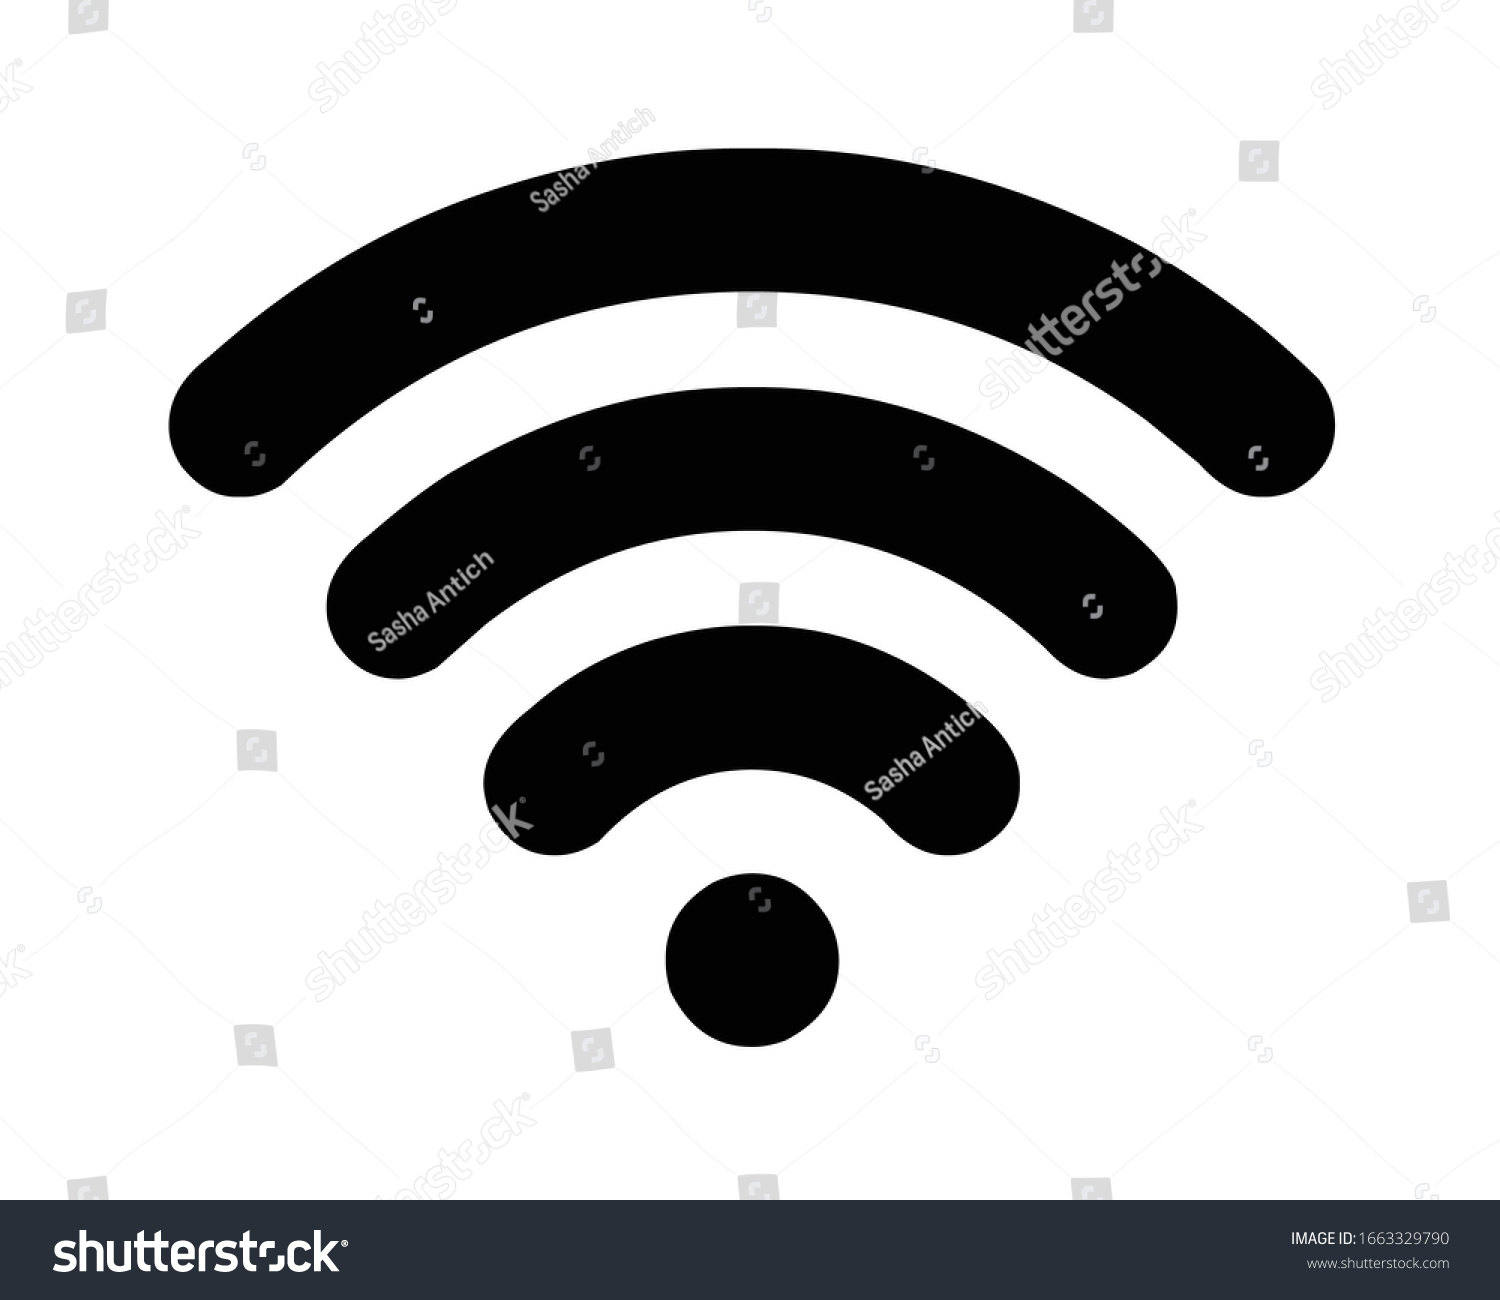 28840 Wifi Silhouette Images Stock Photos And Vectors Shutterstock